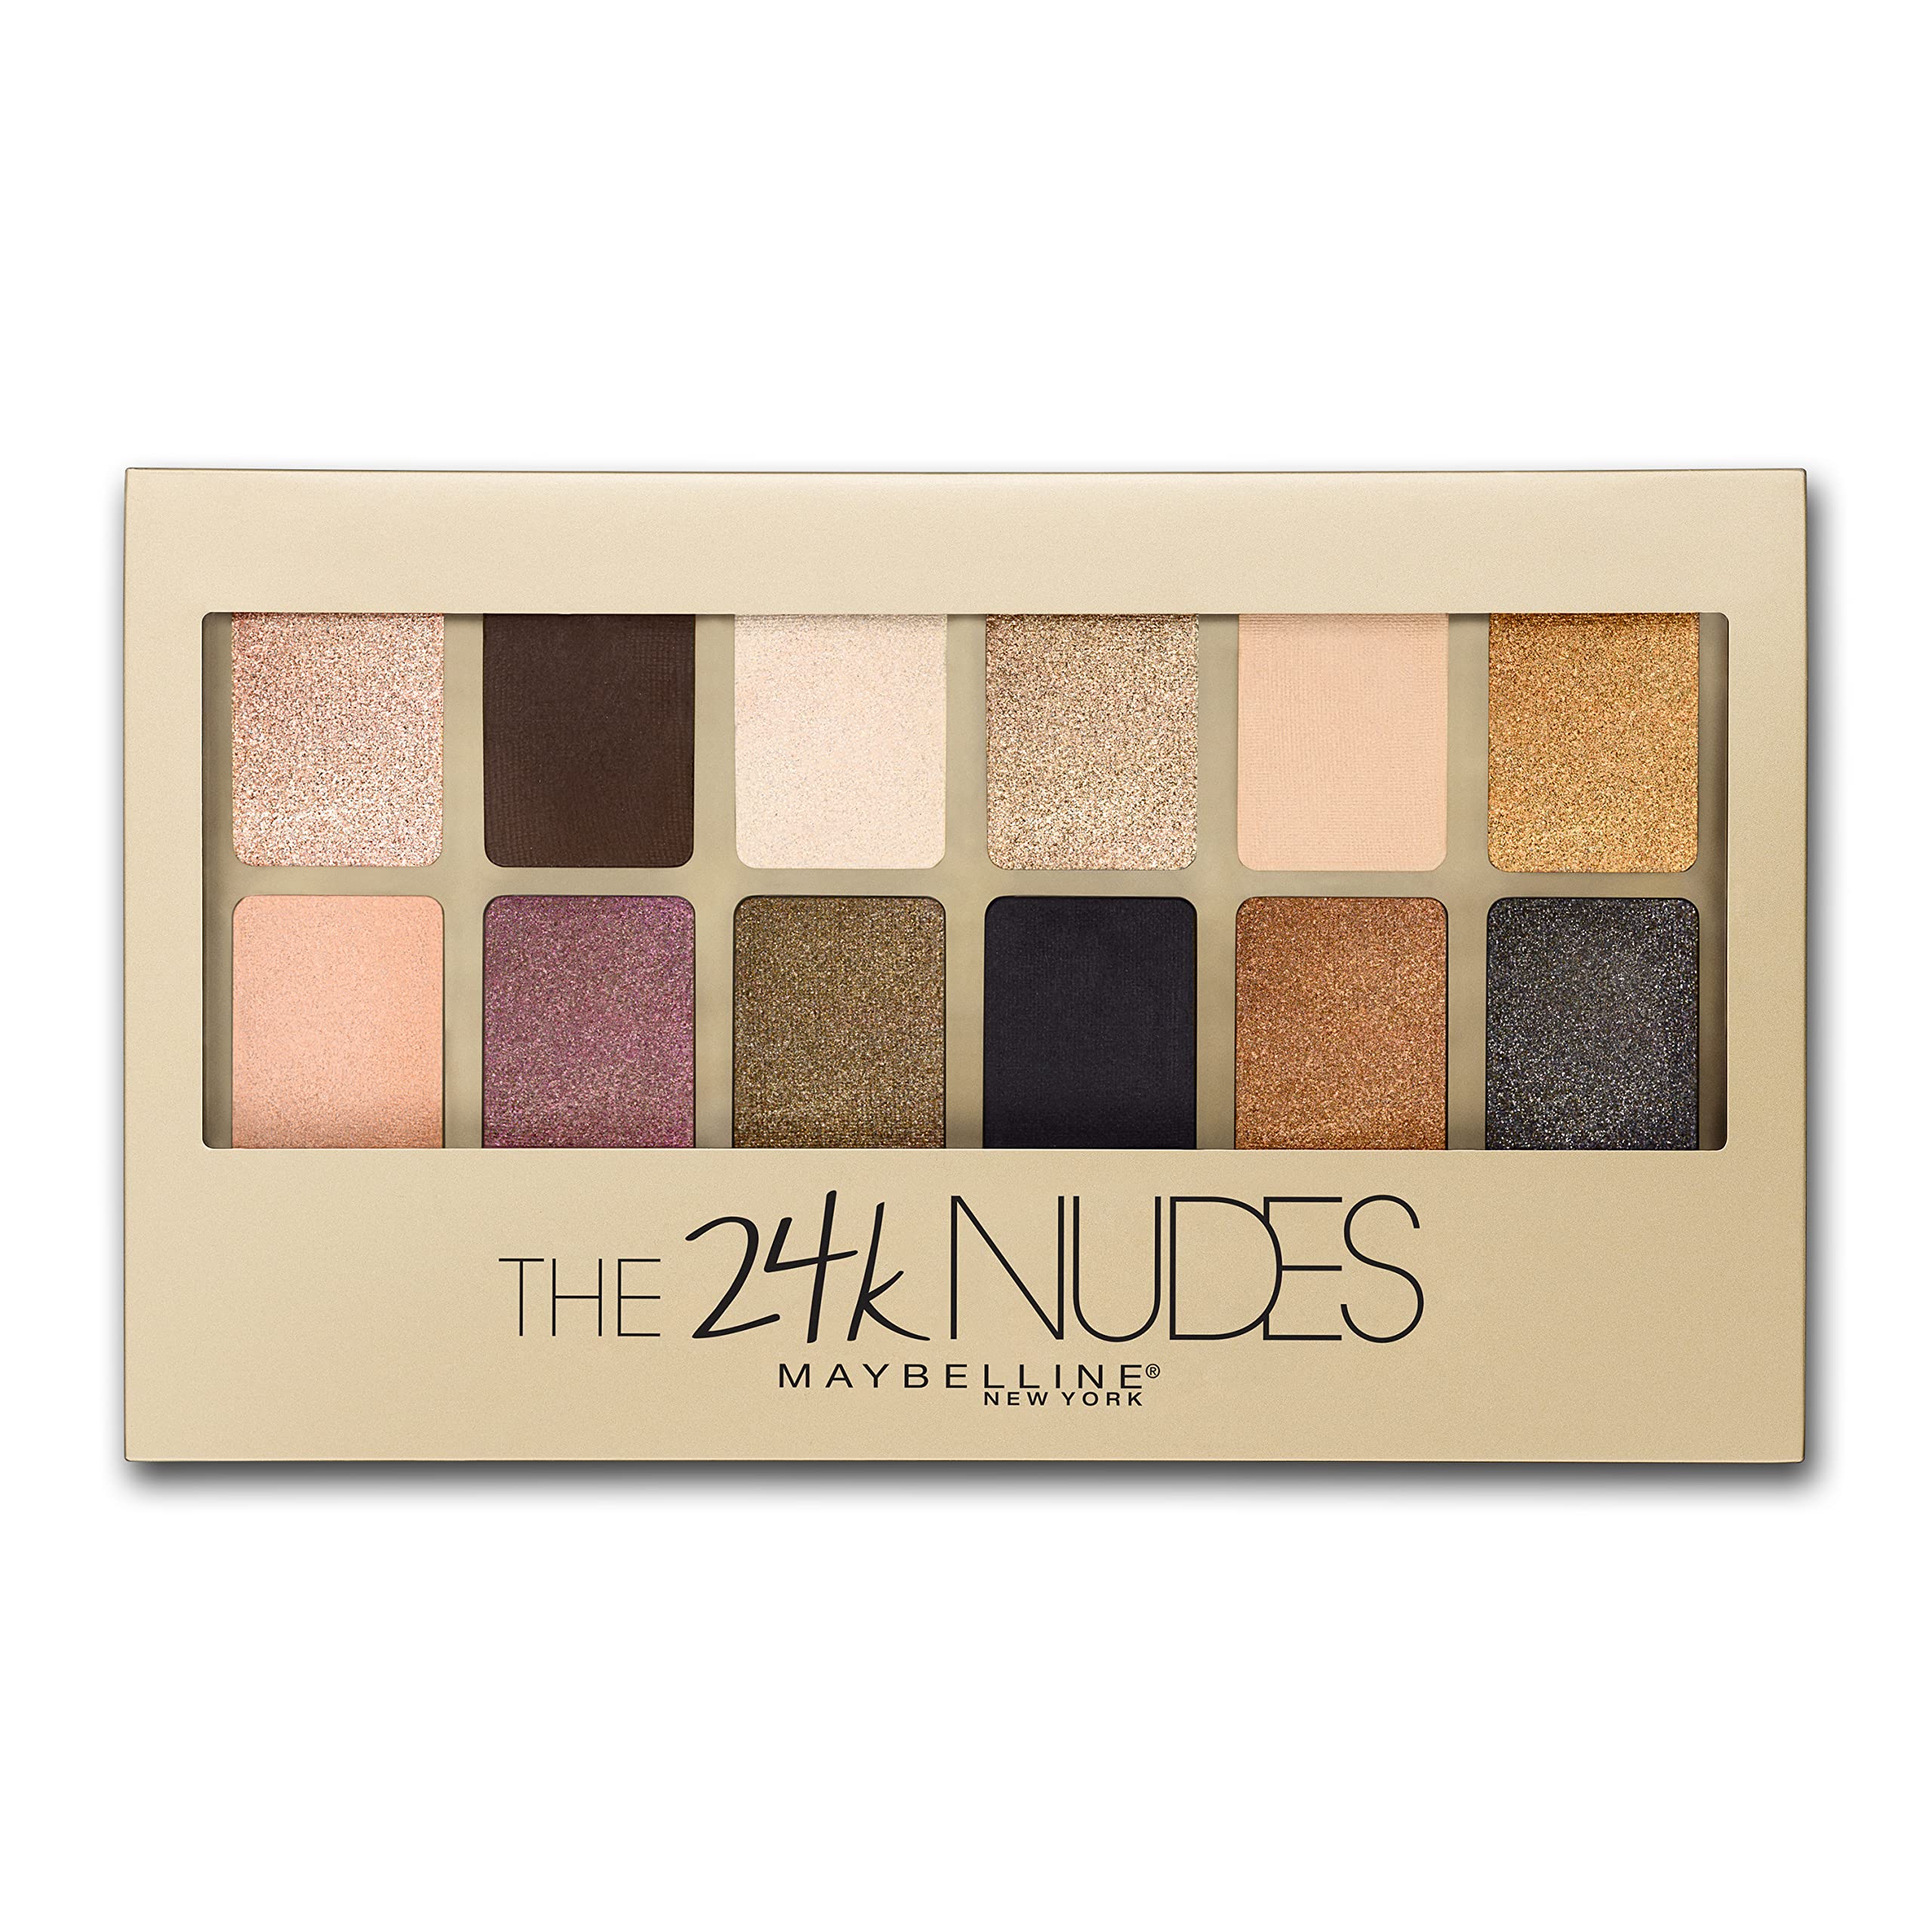 Maybelline The 24K Nudes Gold Eyeshadow Palette Makeup, 12 Pigmented Matte & Shimmer Shades, Blendable Powder, 1 Count